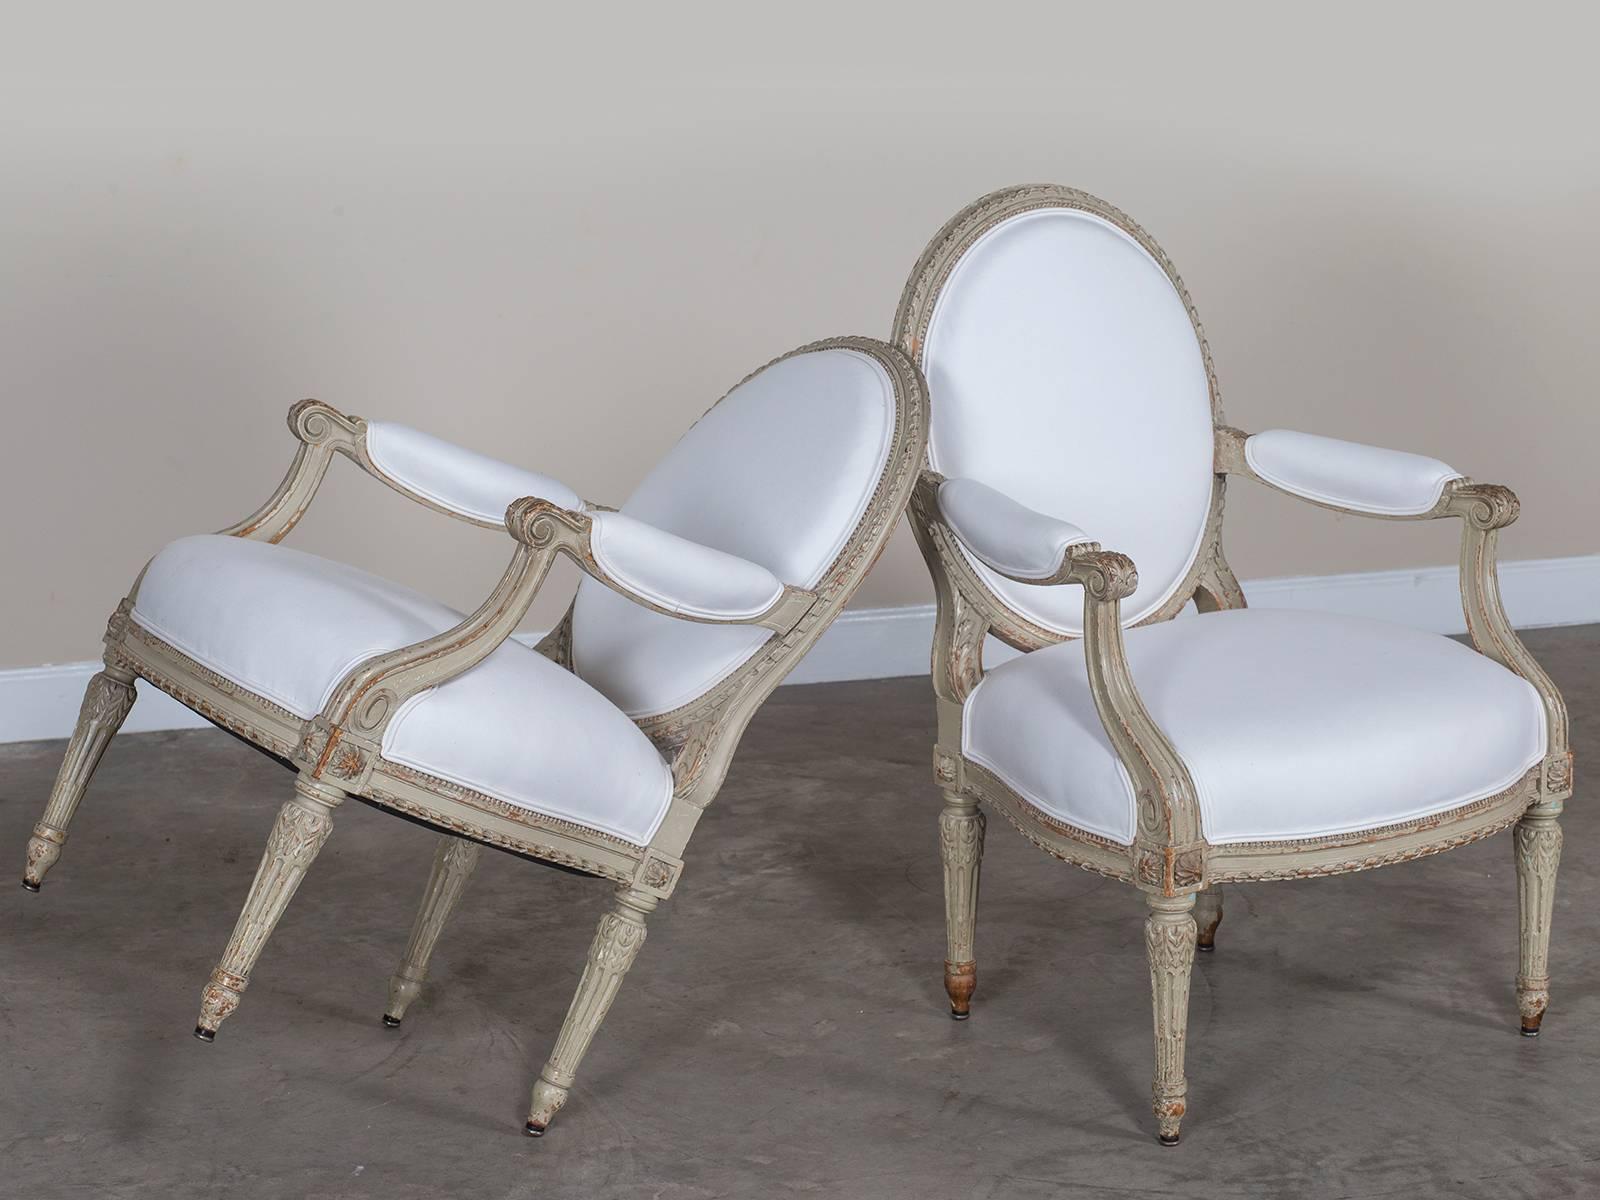 Receive our new selections direct from 1stdibs by email each week. Please click follow dealer below and see them first!

These beautiful antique French Louis XVI style painted armchairs, circa 1880 are marvelously comfortable. The elegant lines of